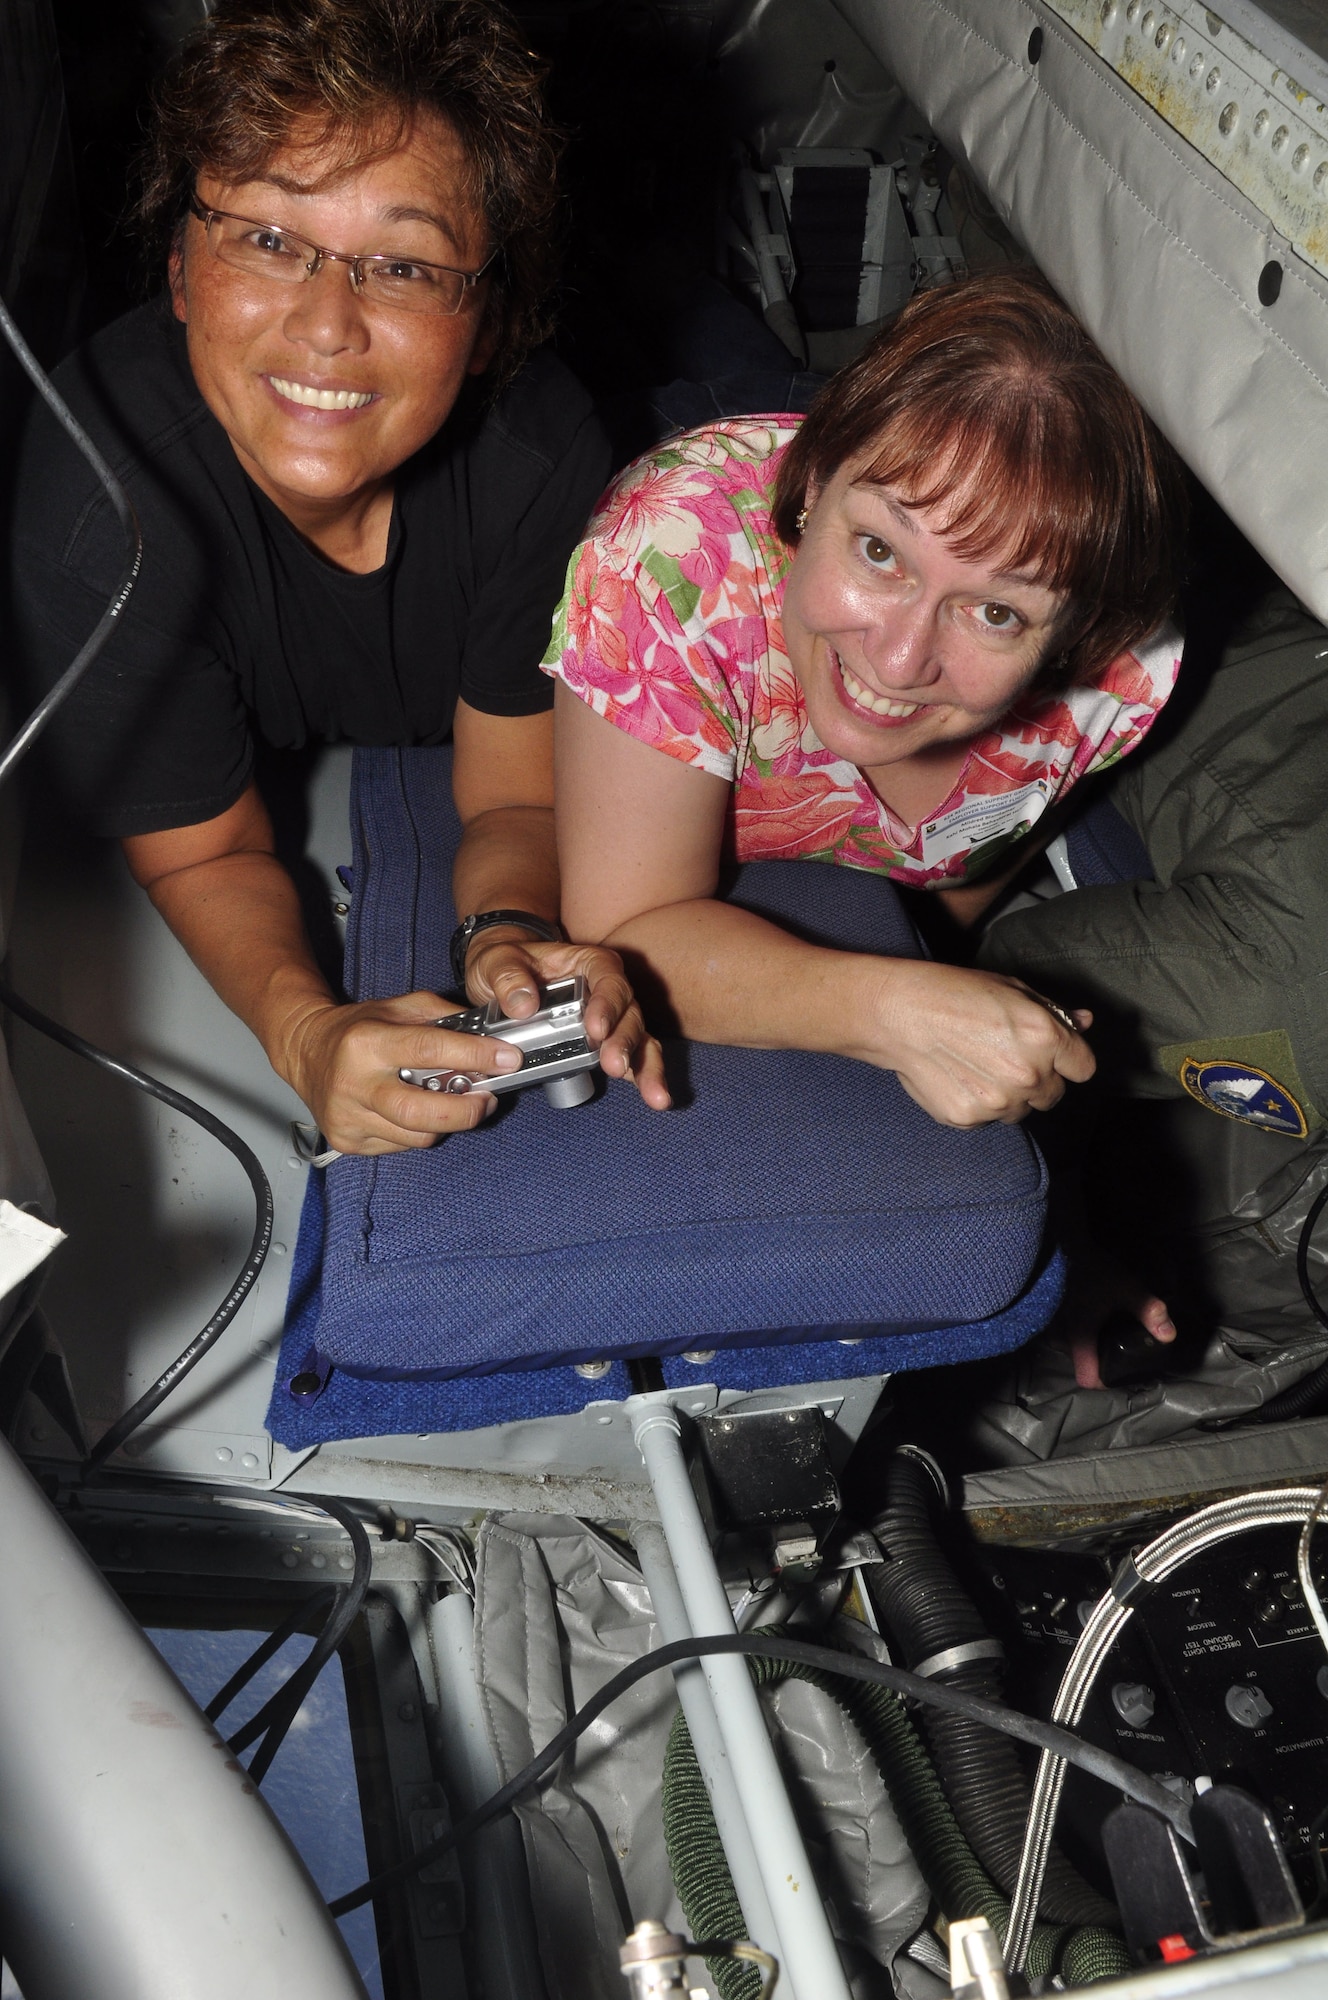 Master Sgt. Diane Marques, 48th Aerial Port Squadron, and her civilian employer Mildred Blandamer, Kahi Mohala Behavioral Health, squeeze in to watch the boom operator of a KC-135 Stratotanker refuel a Hawaii Air National Guard F-15 Eagle over the Hawaiian Islands Nov. 7. They were a part of the 624th Regional Support Group’s first-ever Employer Support Flight at Hickam Air Force Base, Hawaii. The event, held in co-operation with the Hawaii Committee of the Employer Support for the Guard and Reserve, helped employers better understand the time and sacrifice their employees invest in their role as Air Force Reservists.The KC-135 used for Saturday's Employer Support Flight is assigned to the 452nd Air Mobility Wing at March Air Reserve Base, Calif. (Air Force photo/Master Sgt. Daniel Nathaniel)